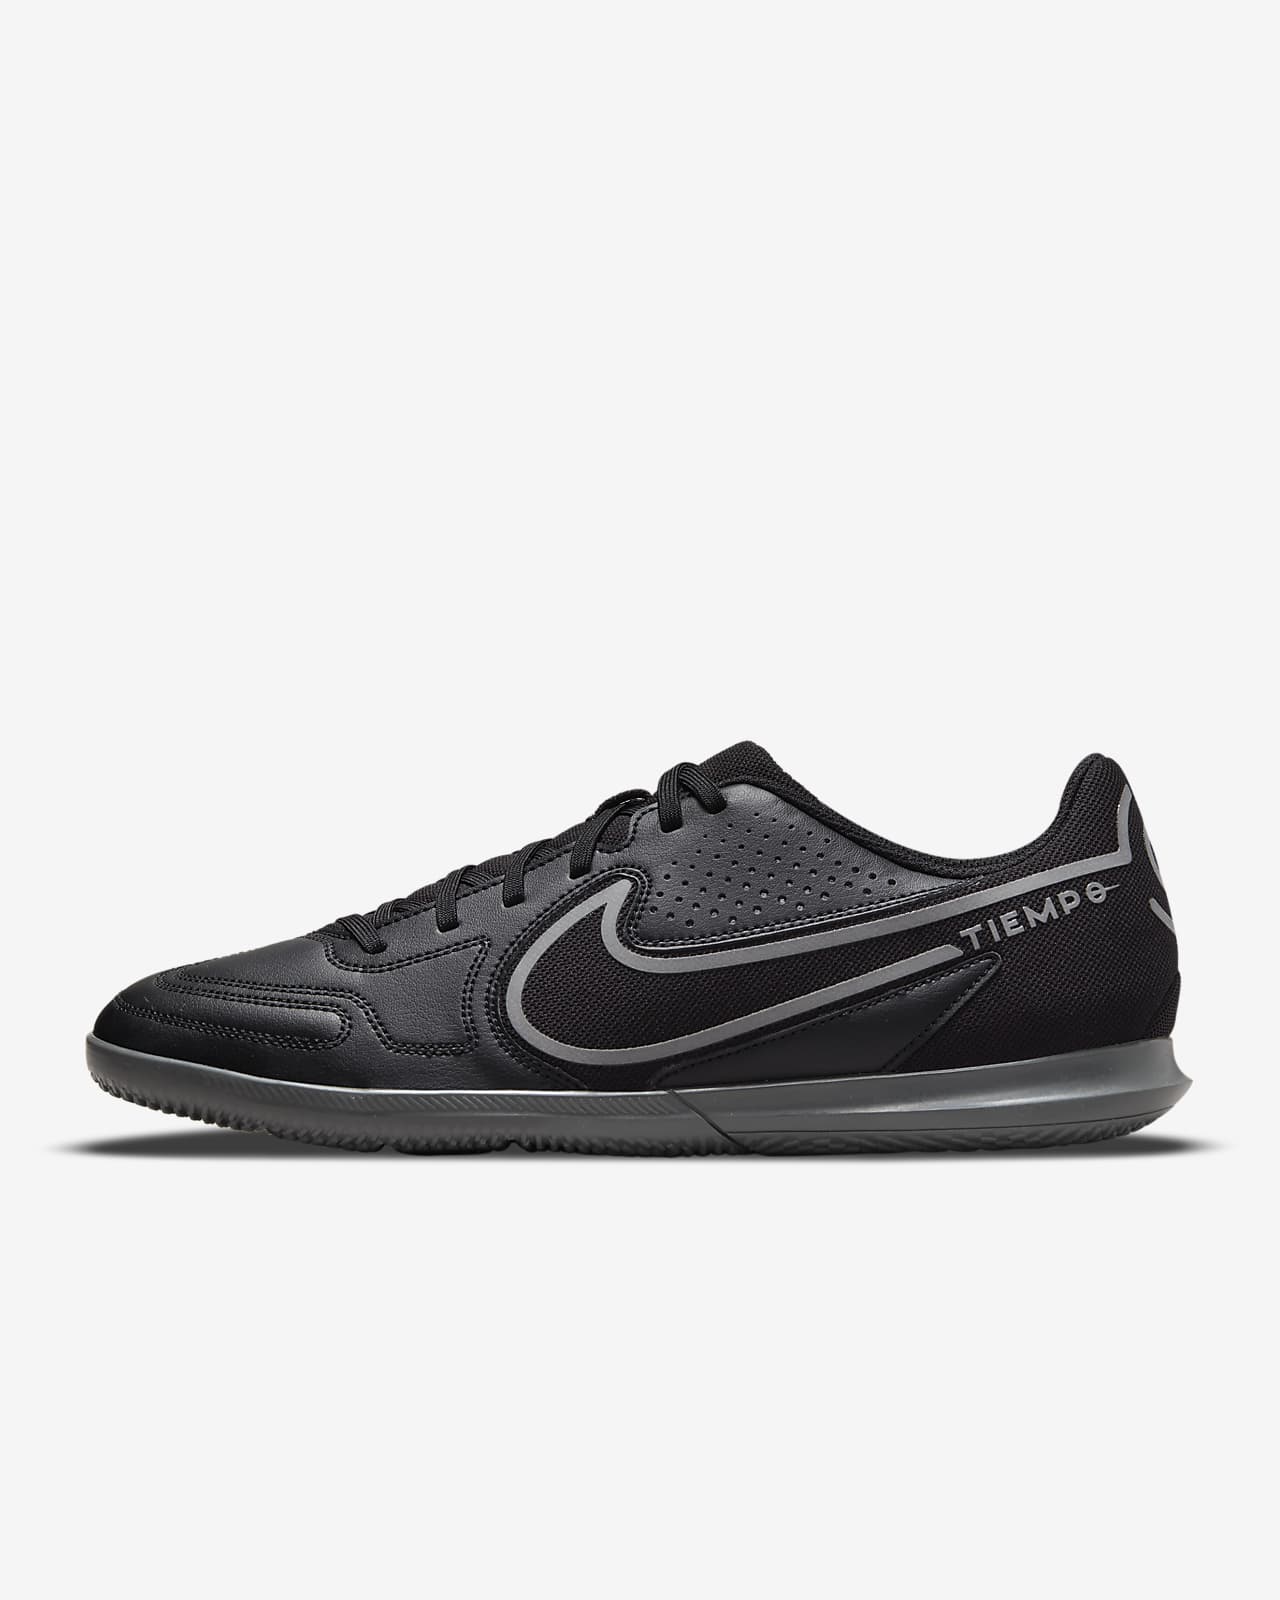 nike black and white indoor soccer shoes